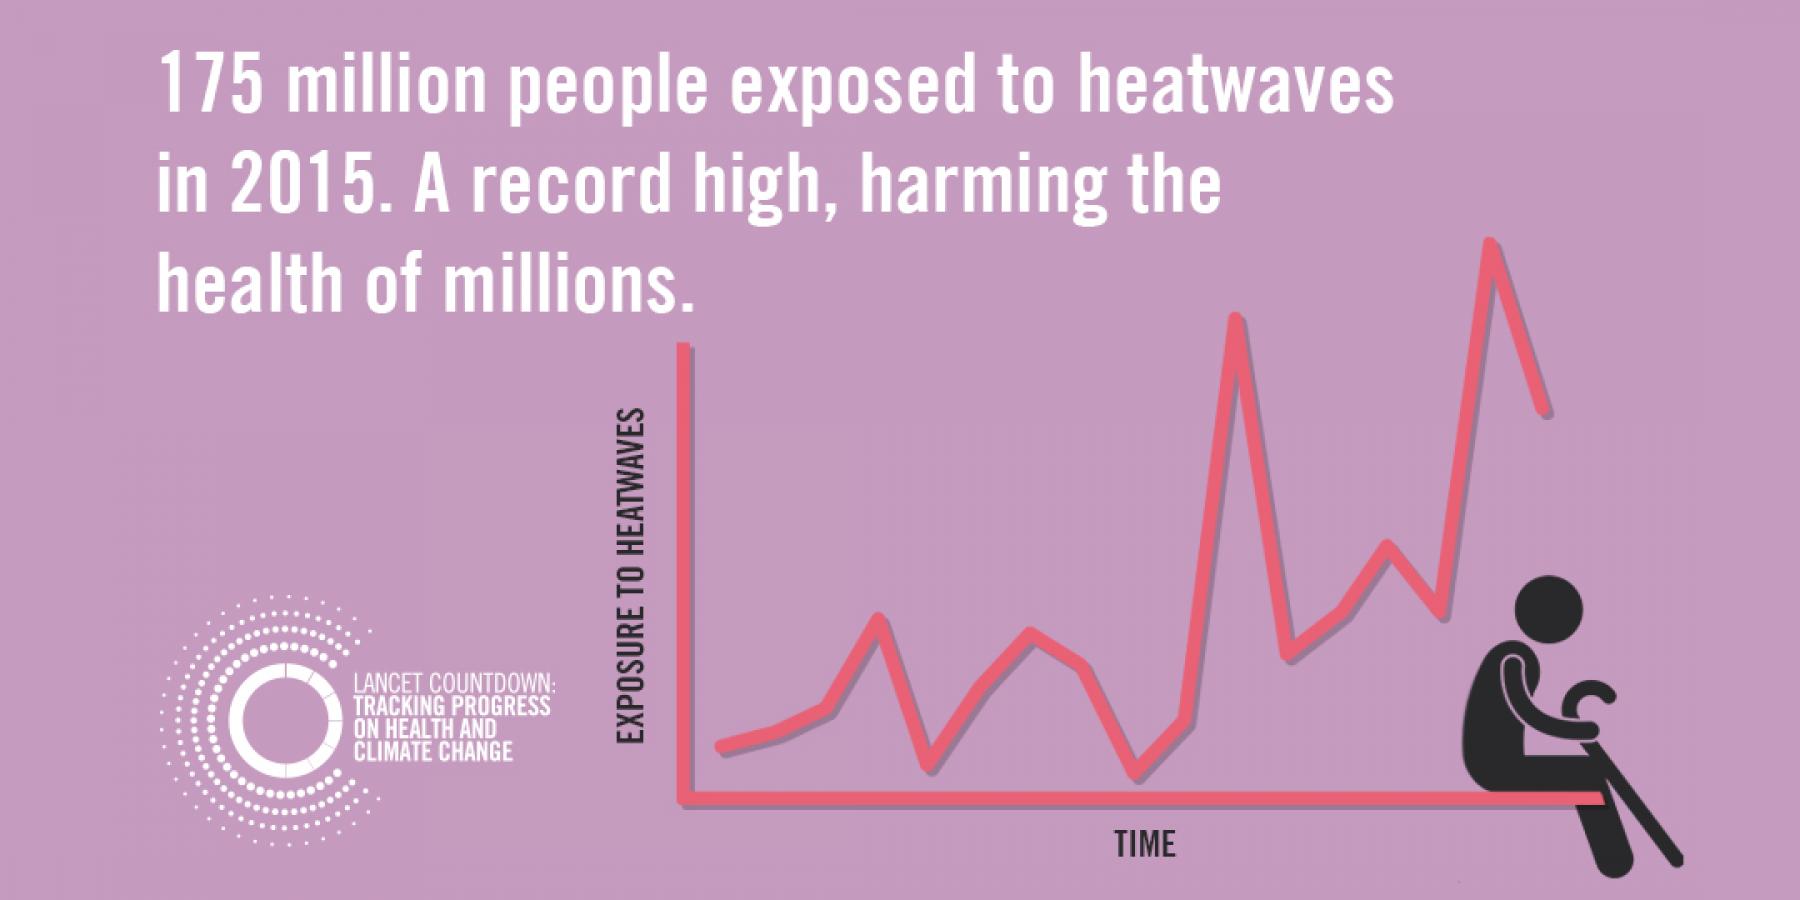 Lancet Countdown graphic: climate change leading to more heatwaves, affecting global health